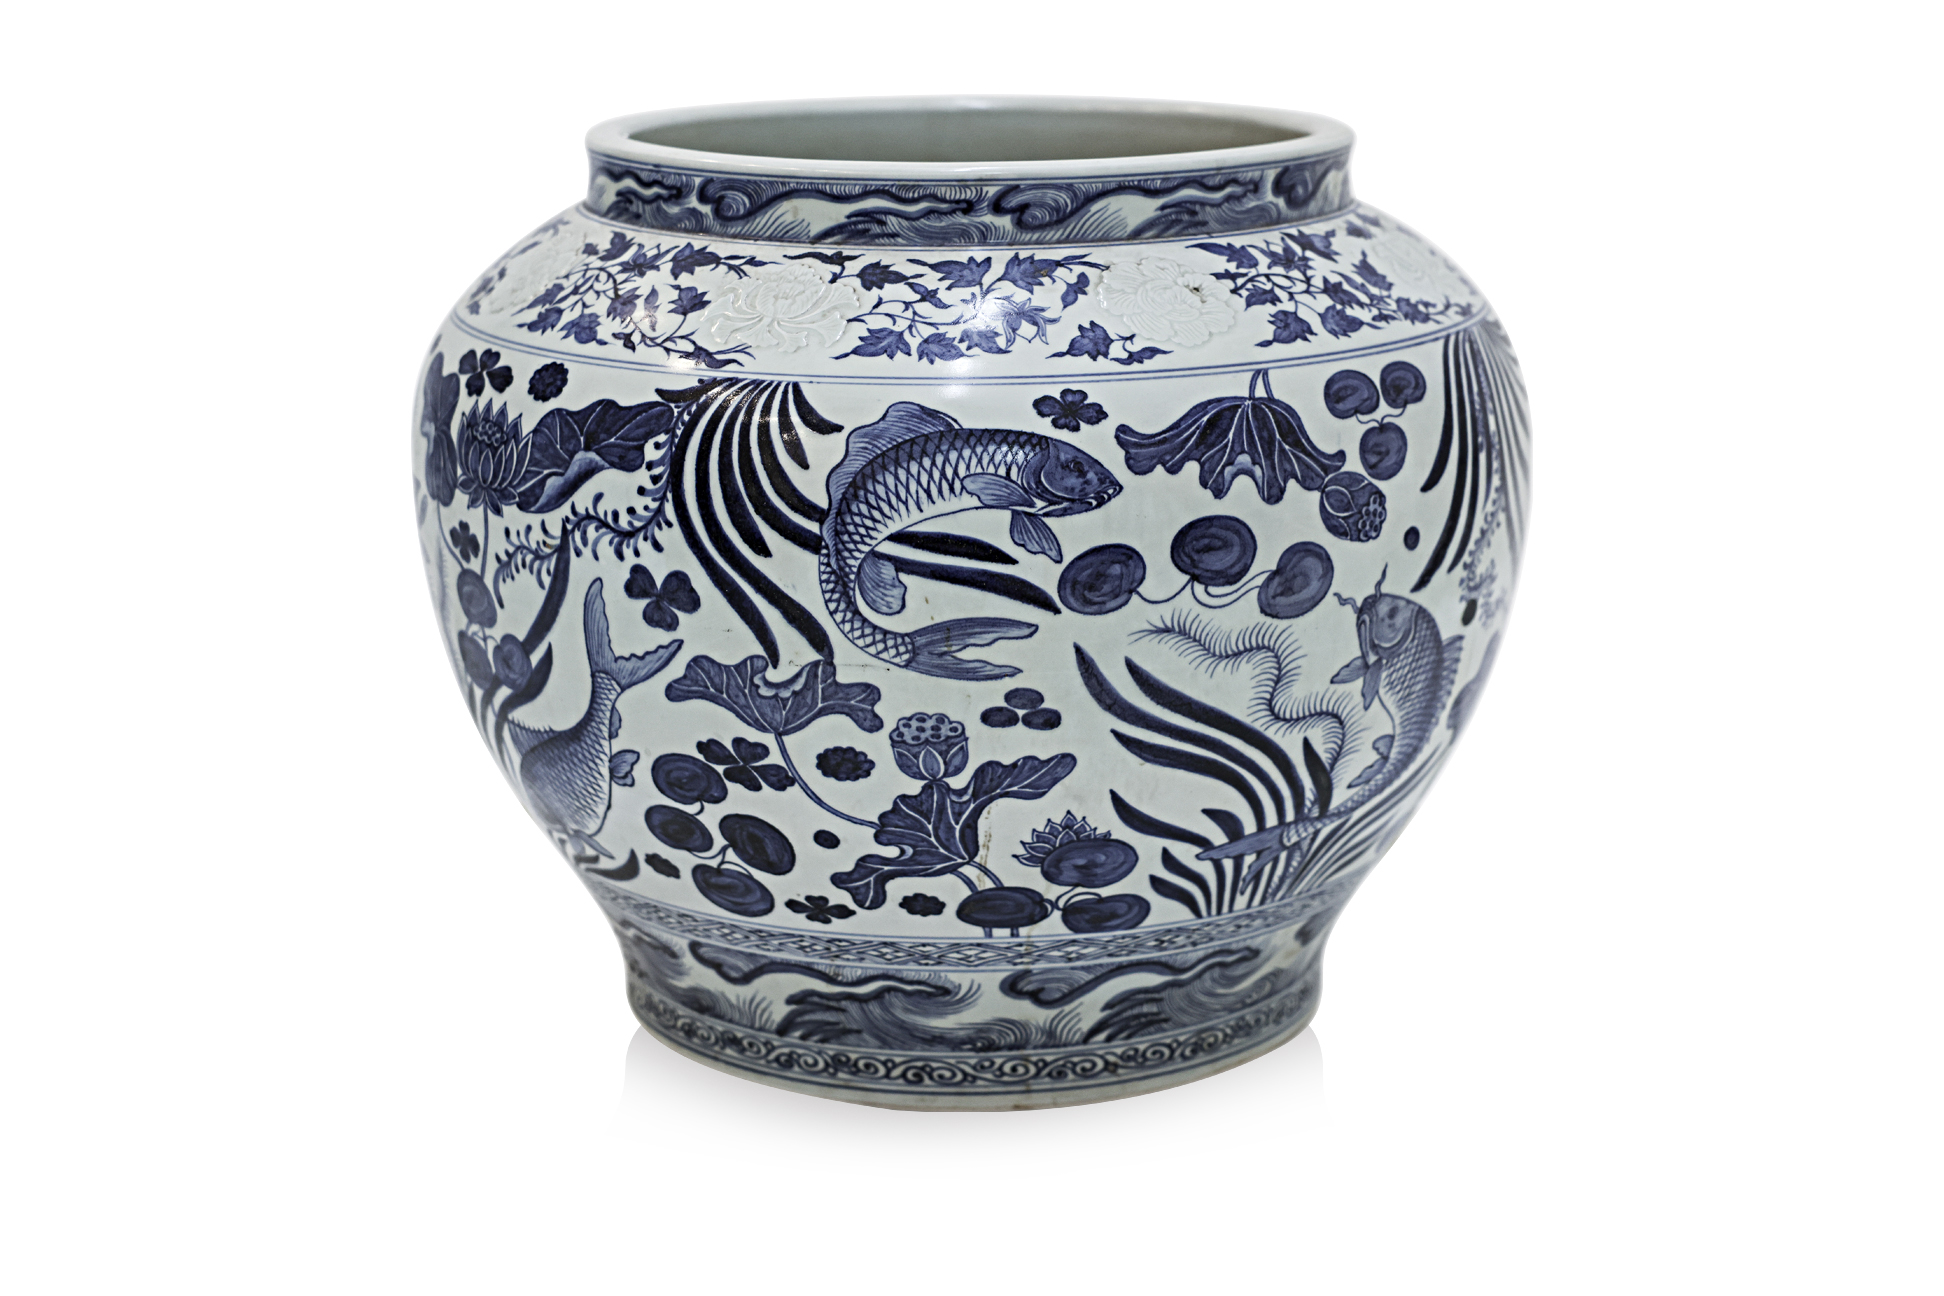 A VERY LARGE BLUE AND WHITE PORCELAIN FISH JAR